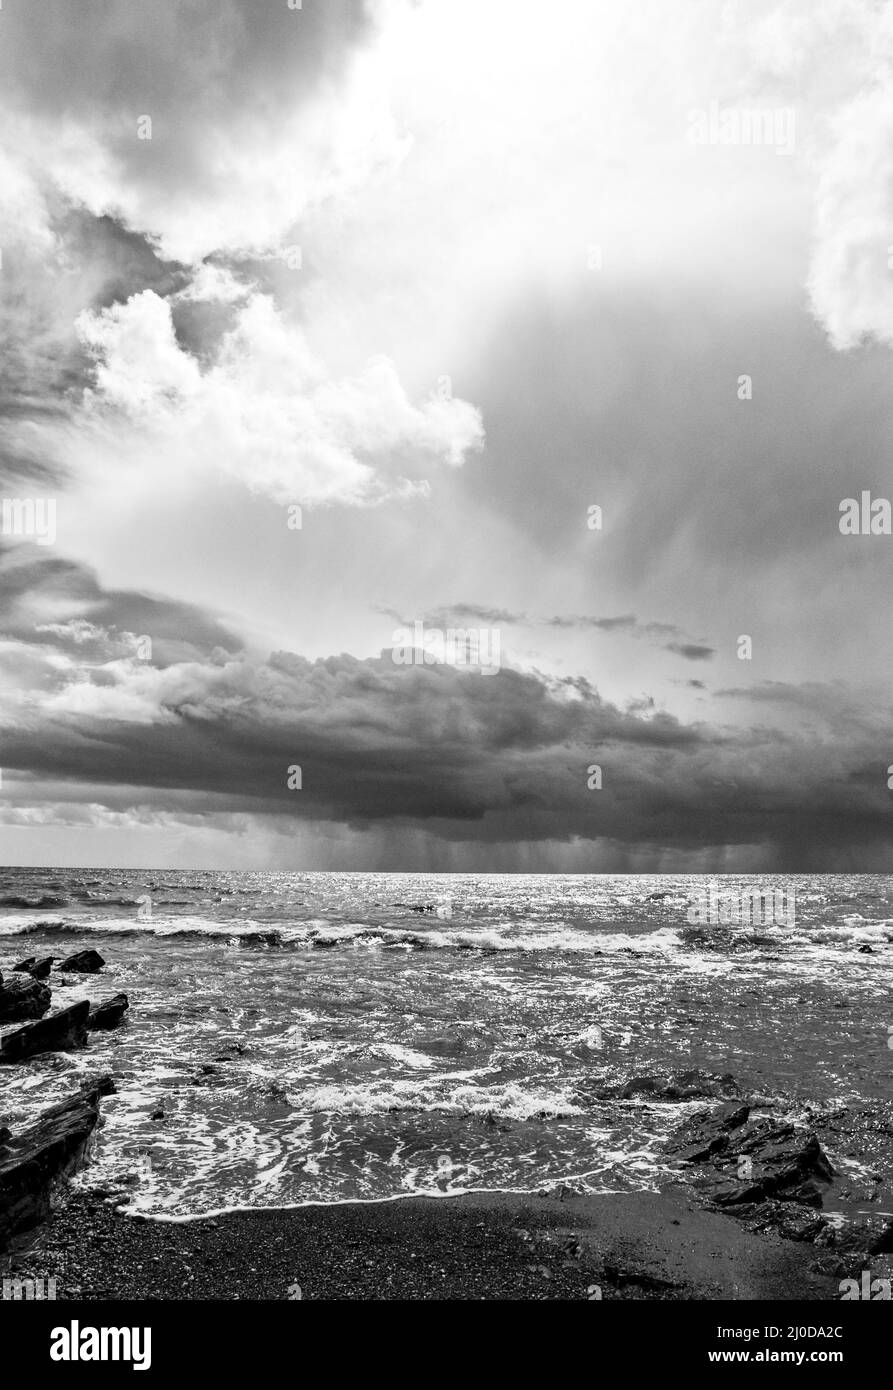 UK, English Channel. Big clouds, rain or storm approaching over, the sea to the beach Stock Photo